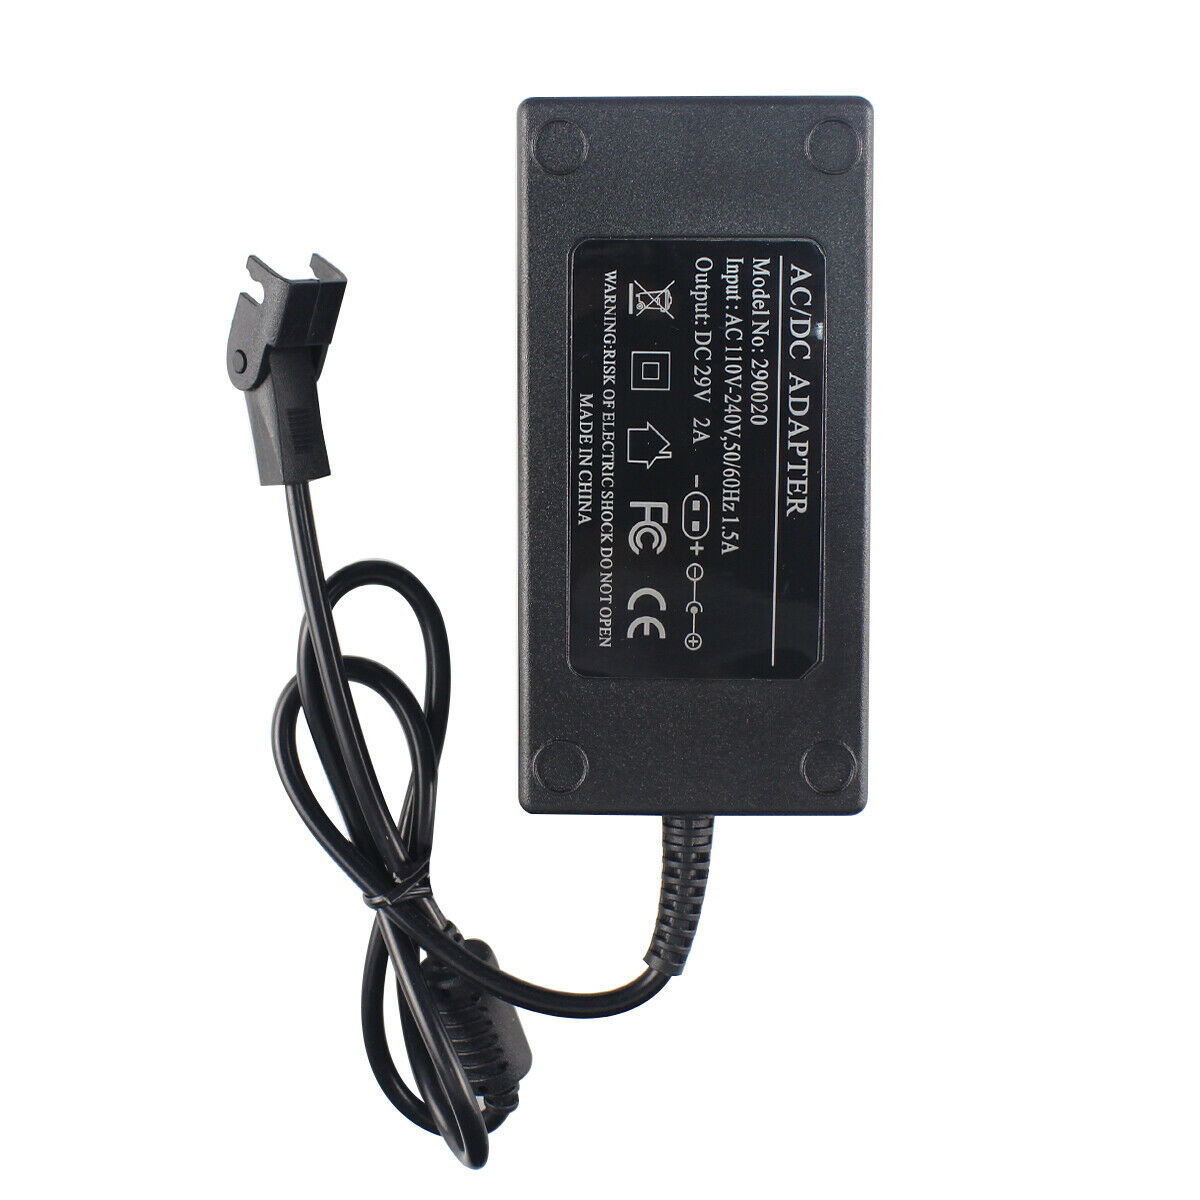 29V AC/DC Power Supply Electric Recliner Sofa Lift Chair Adapter Transformer US Brand: Unbranded Type: 29V 2A AC/DC P